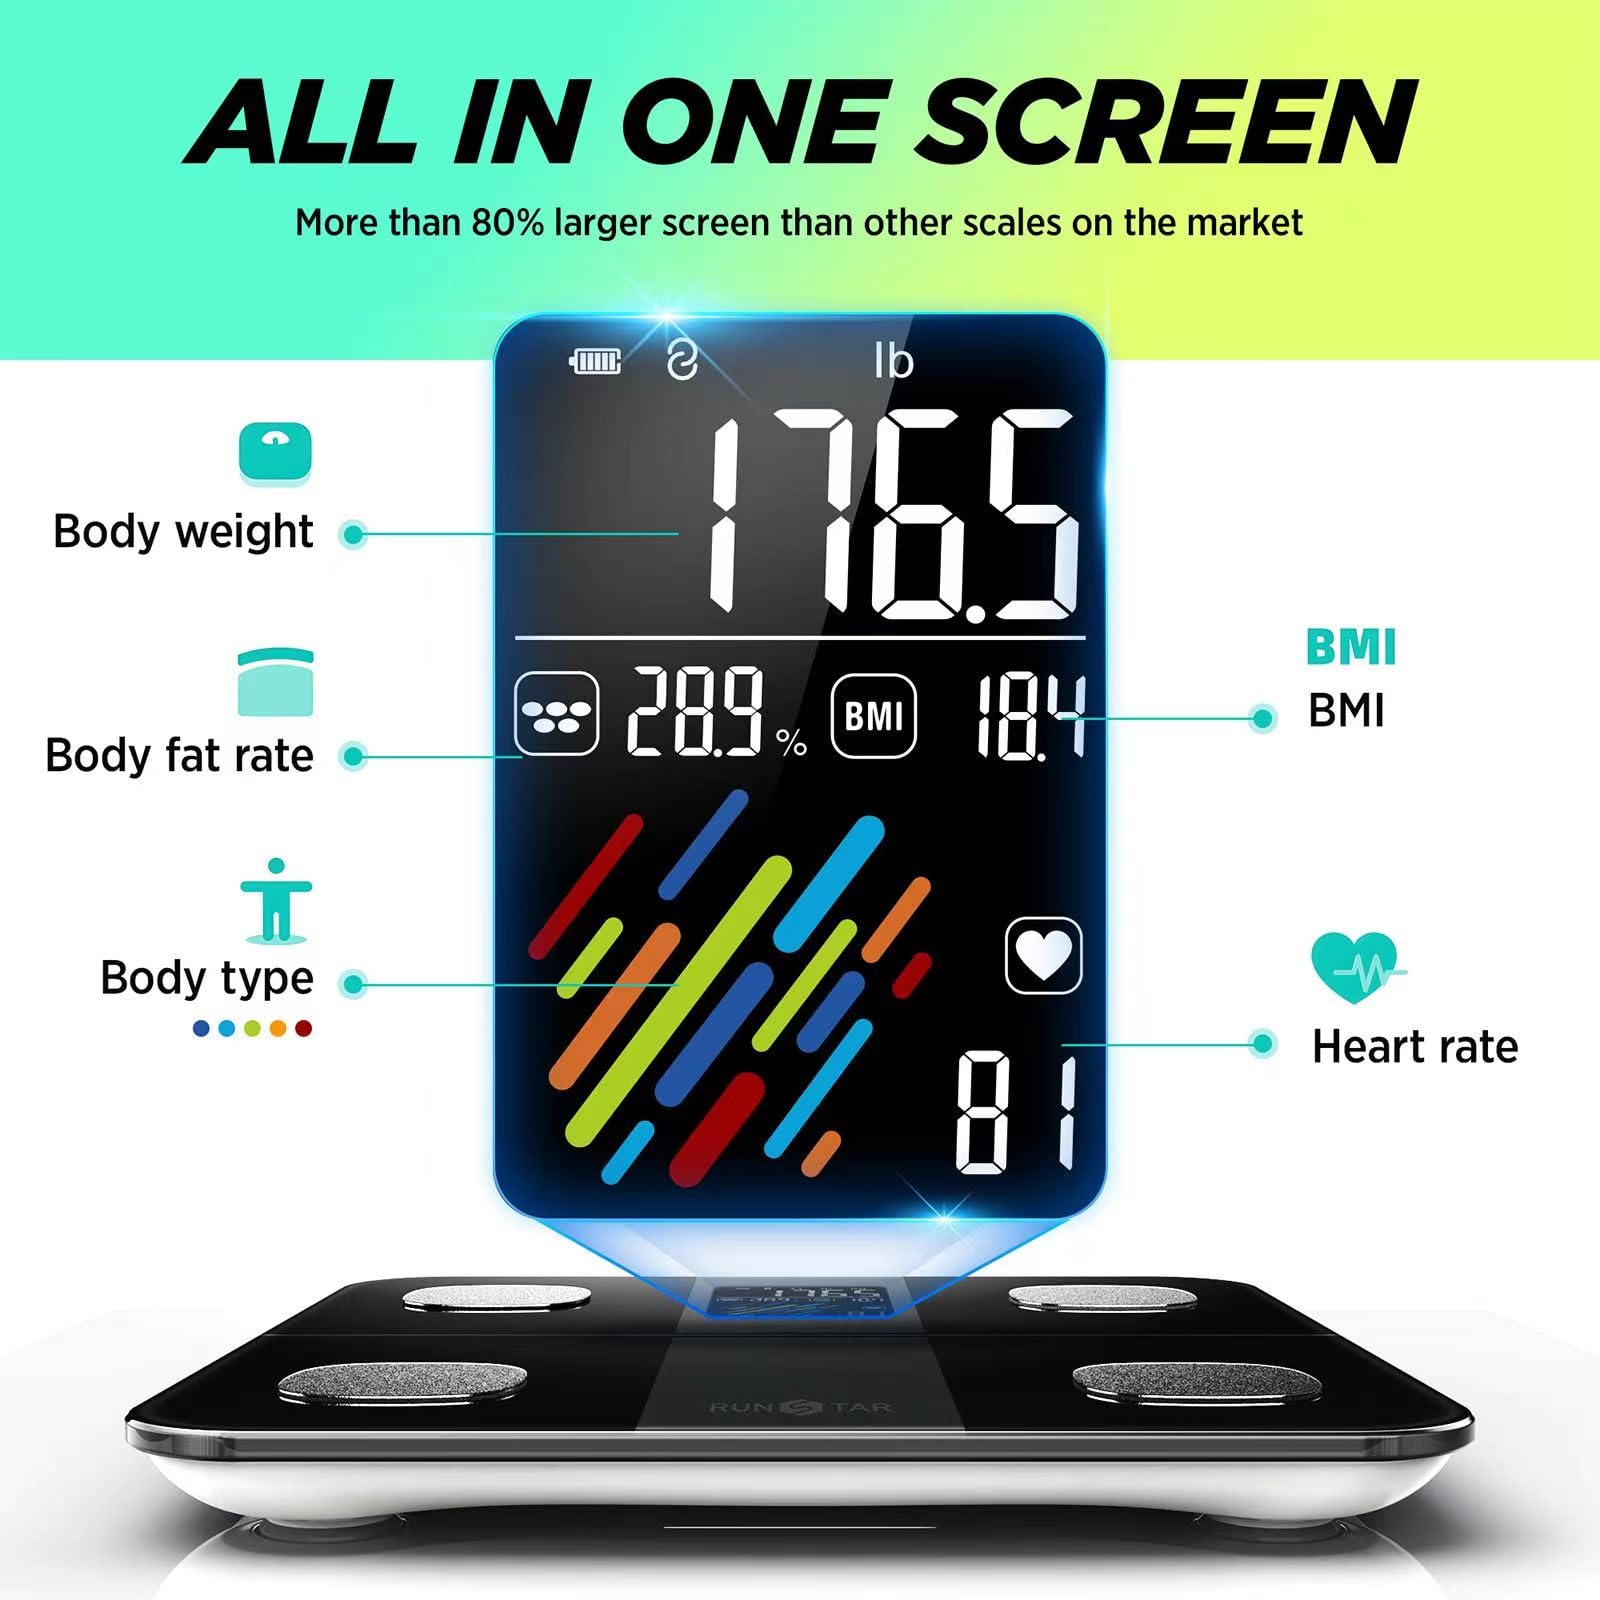 Smart Scale for Body Weight and Fat Percentage, RunSTAR High Accuracy Digital Bathroom Scale with Large Display for BMI Heart Rate FSA&HSA Eligible 15 Body Composition Analyzer Sync with Fitness App